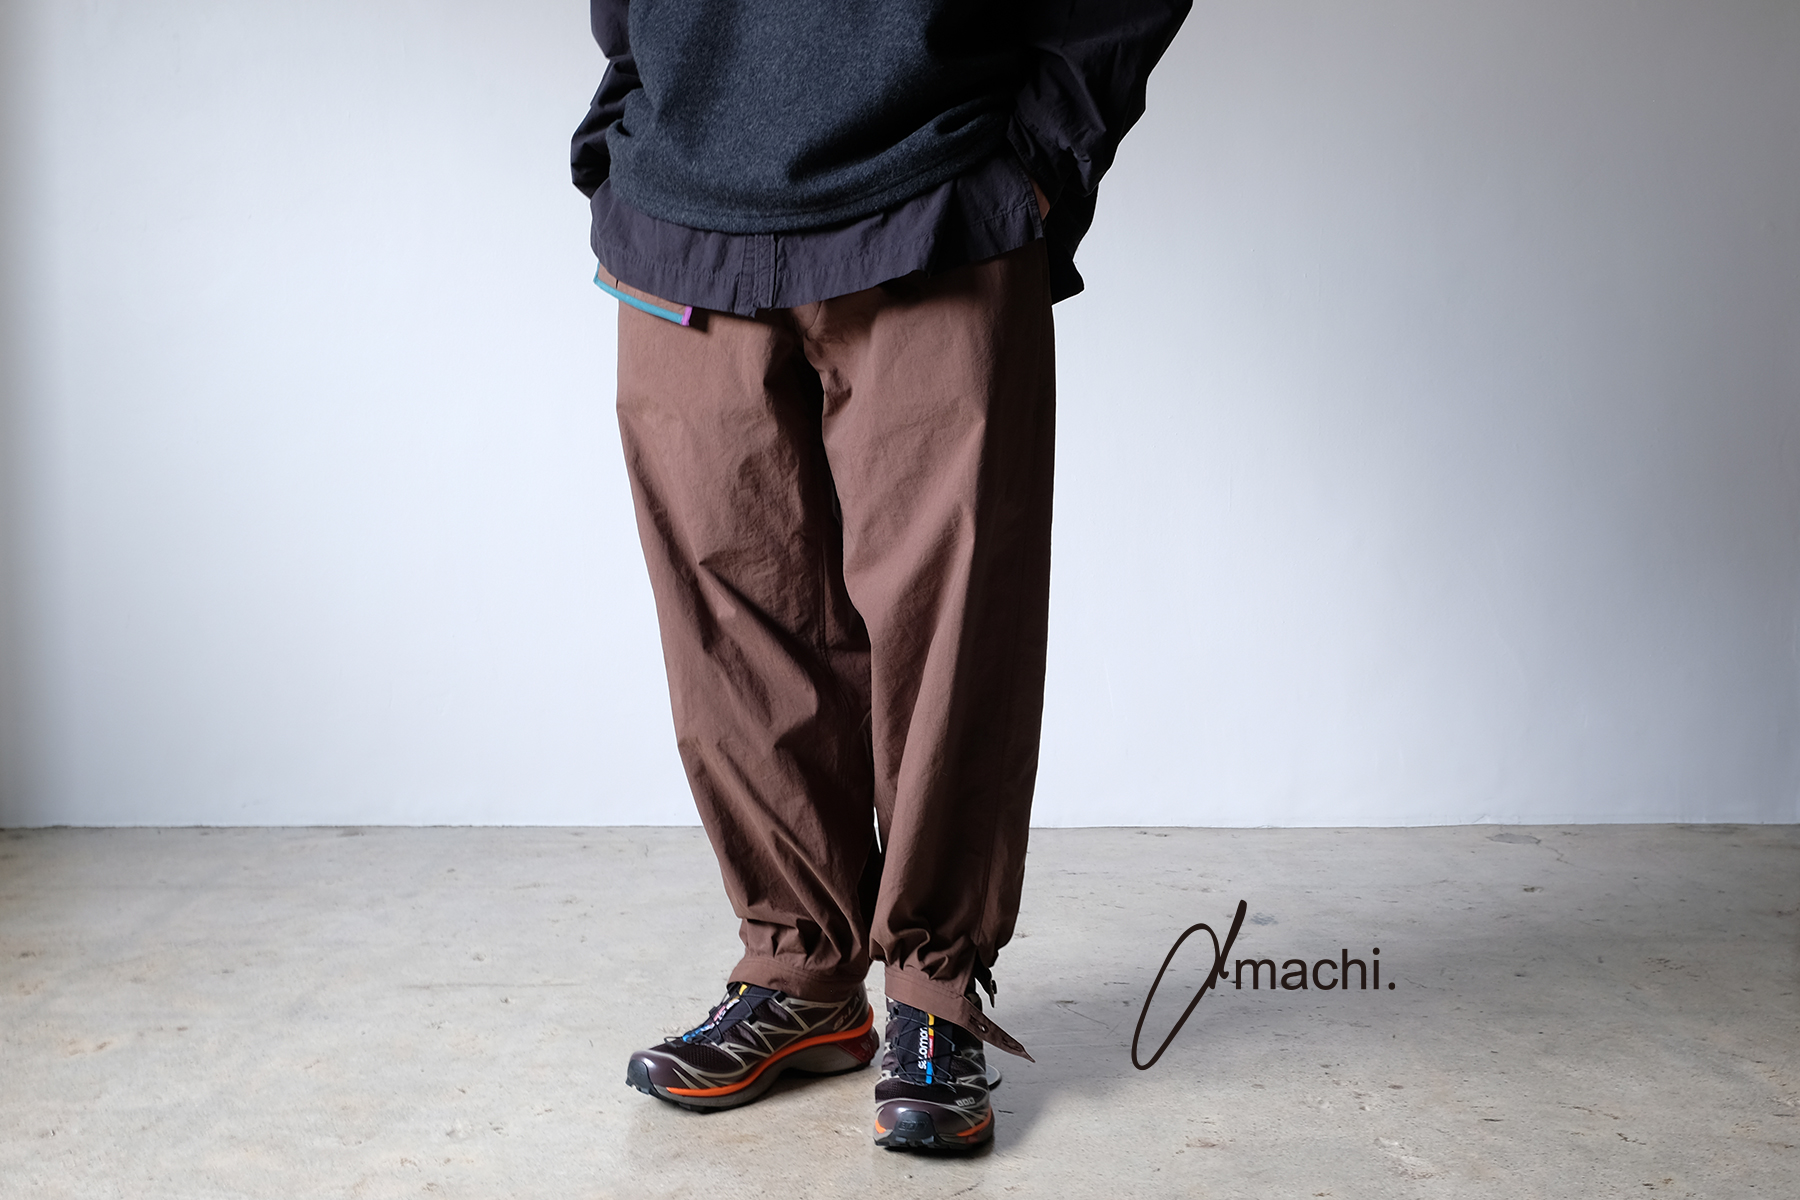 amachi.｜アマチ Collection 007 “Notion of Forms”